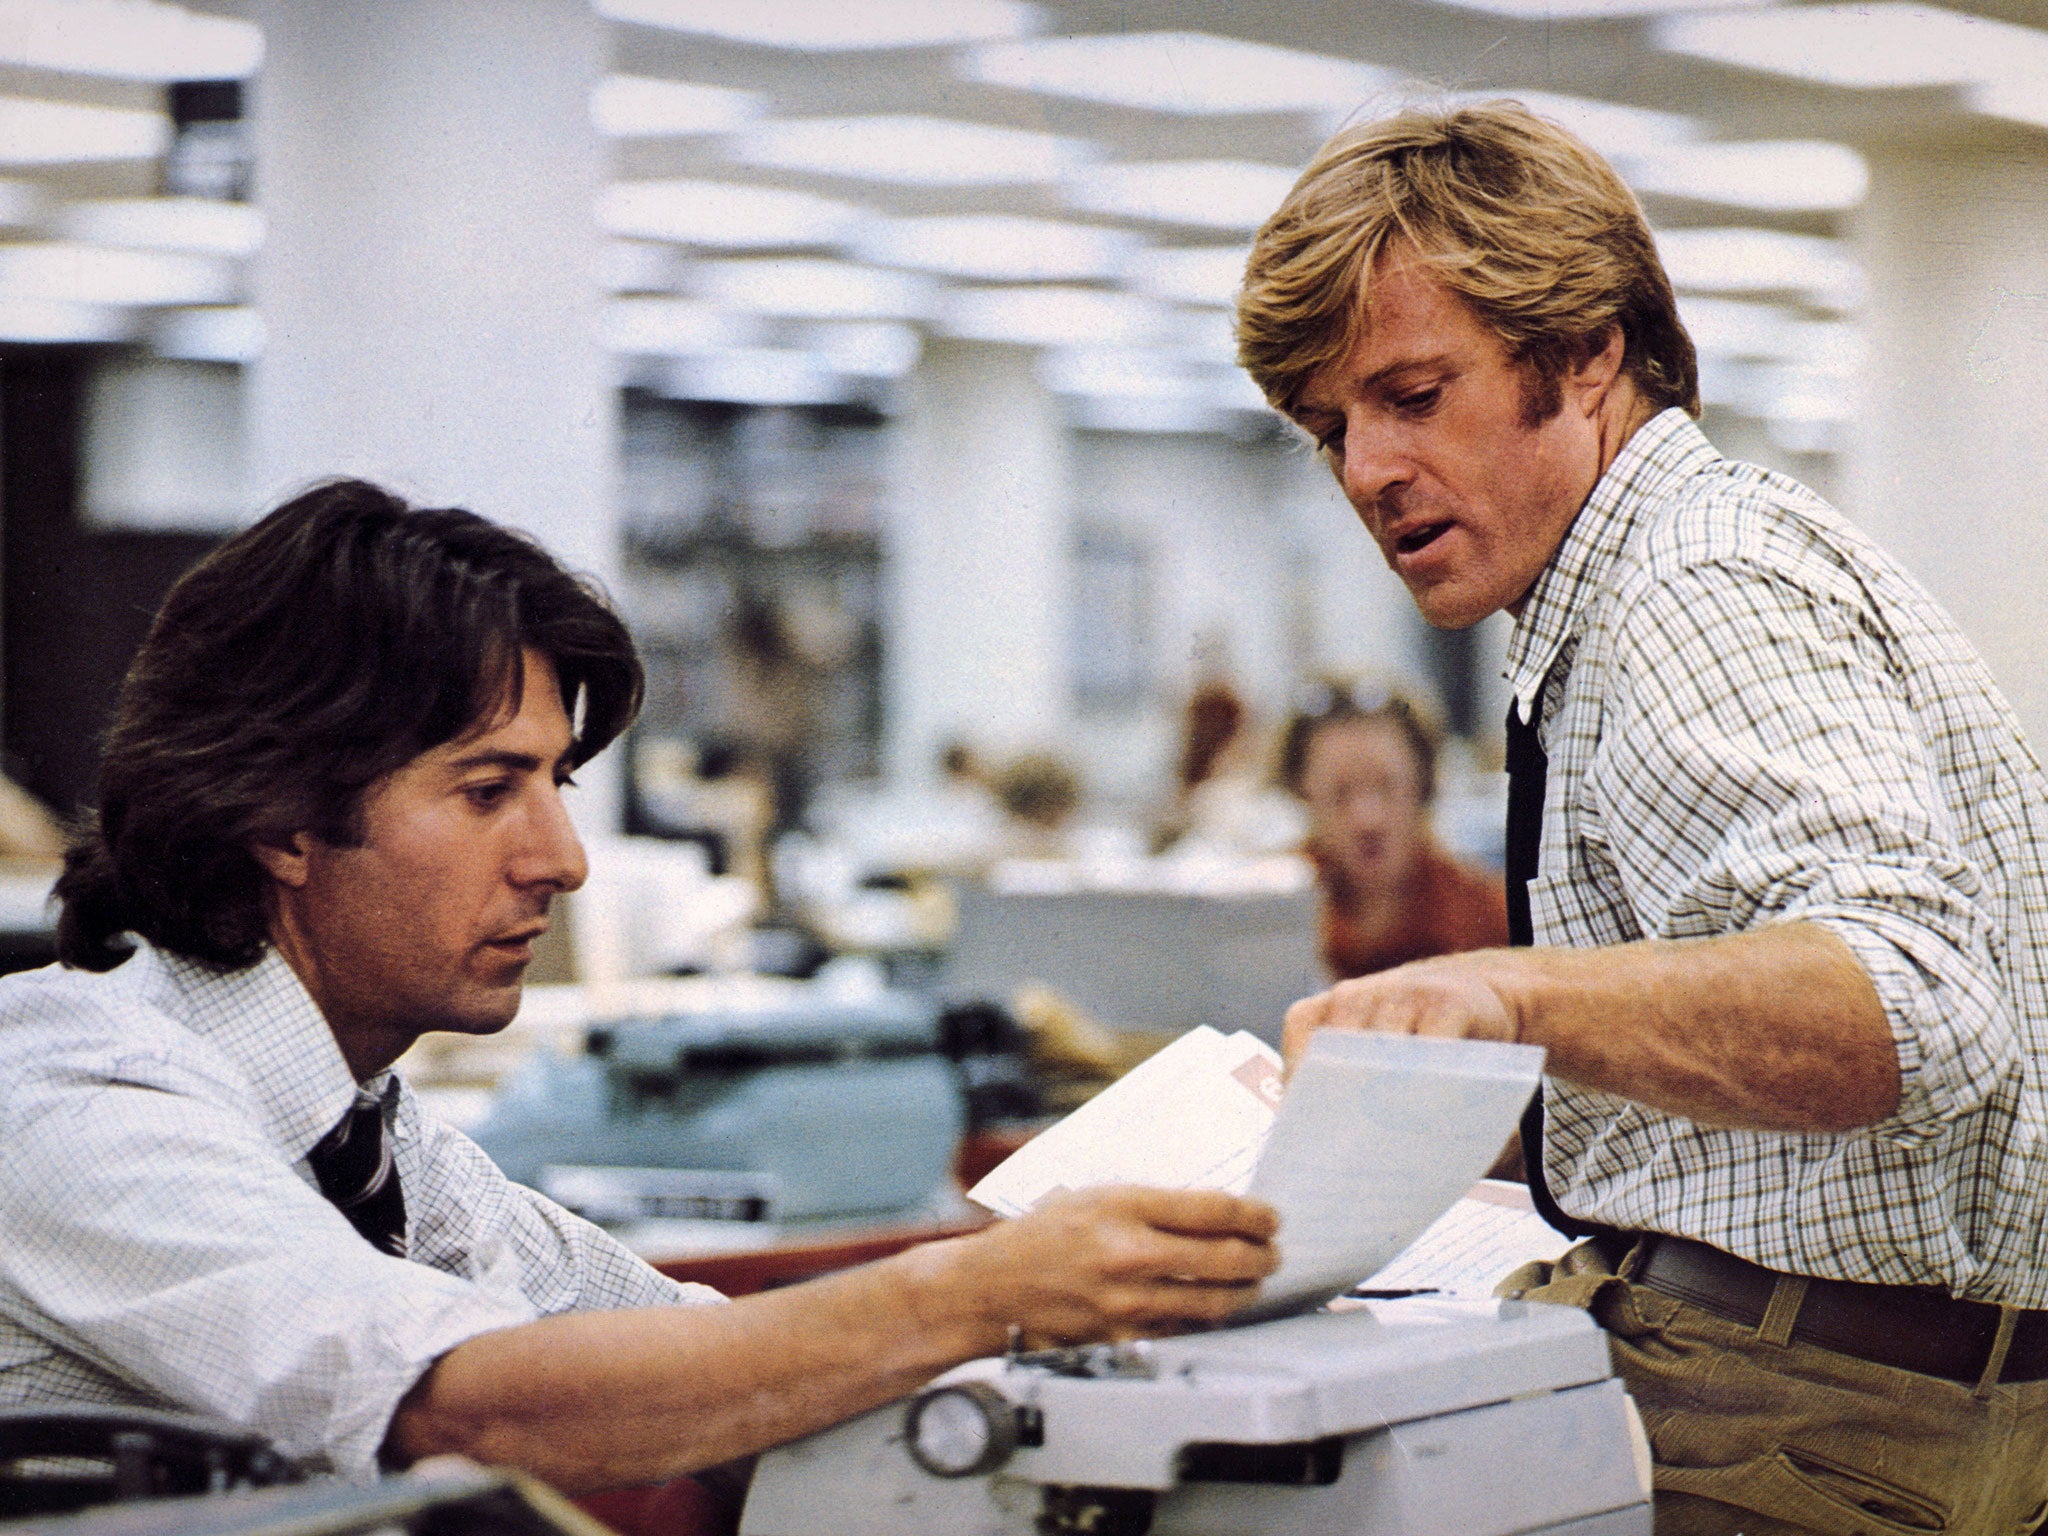 Dustin Hoffman (left) and Robert Redford (right) star in ‘All the President’s Men’. Goldman was initially doubtful that politics would play well at the box office